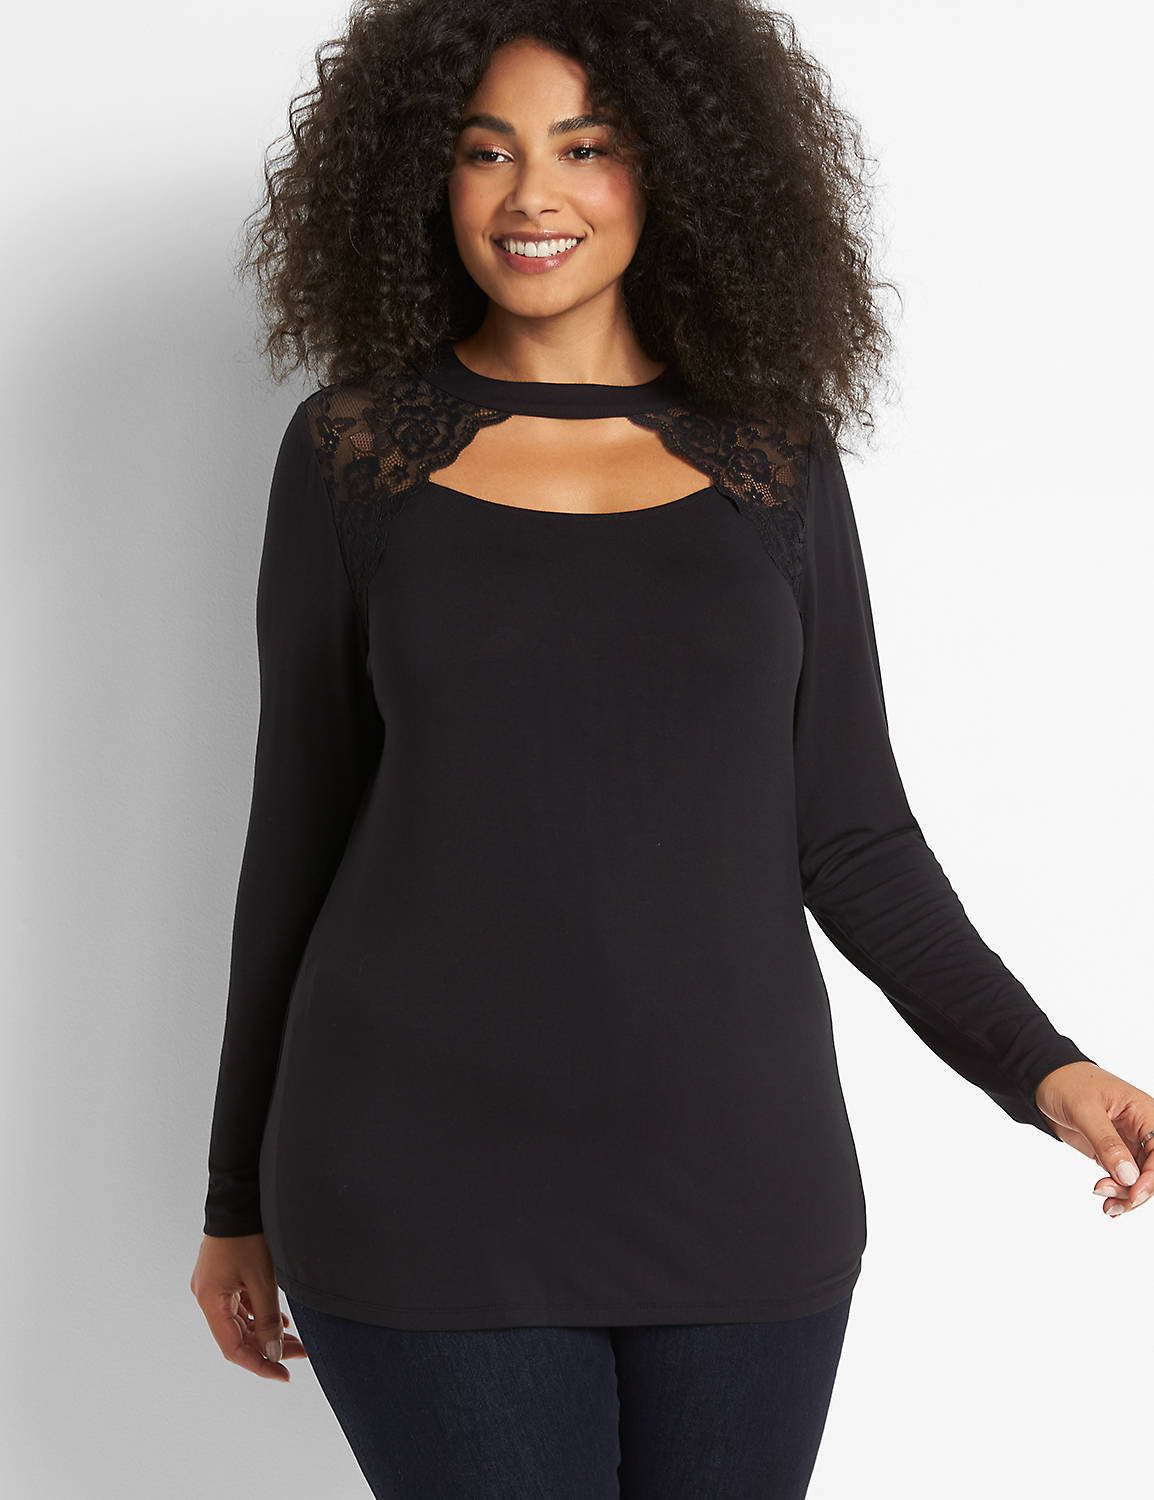 Long Sleeve Envelope Neck Tee With Lace Detail 1123838:Ascena Black:34/36 Product Image 1